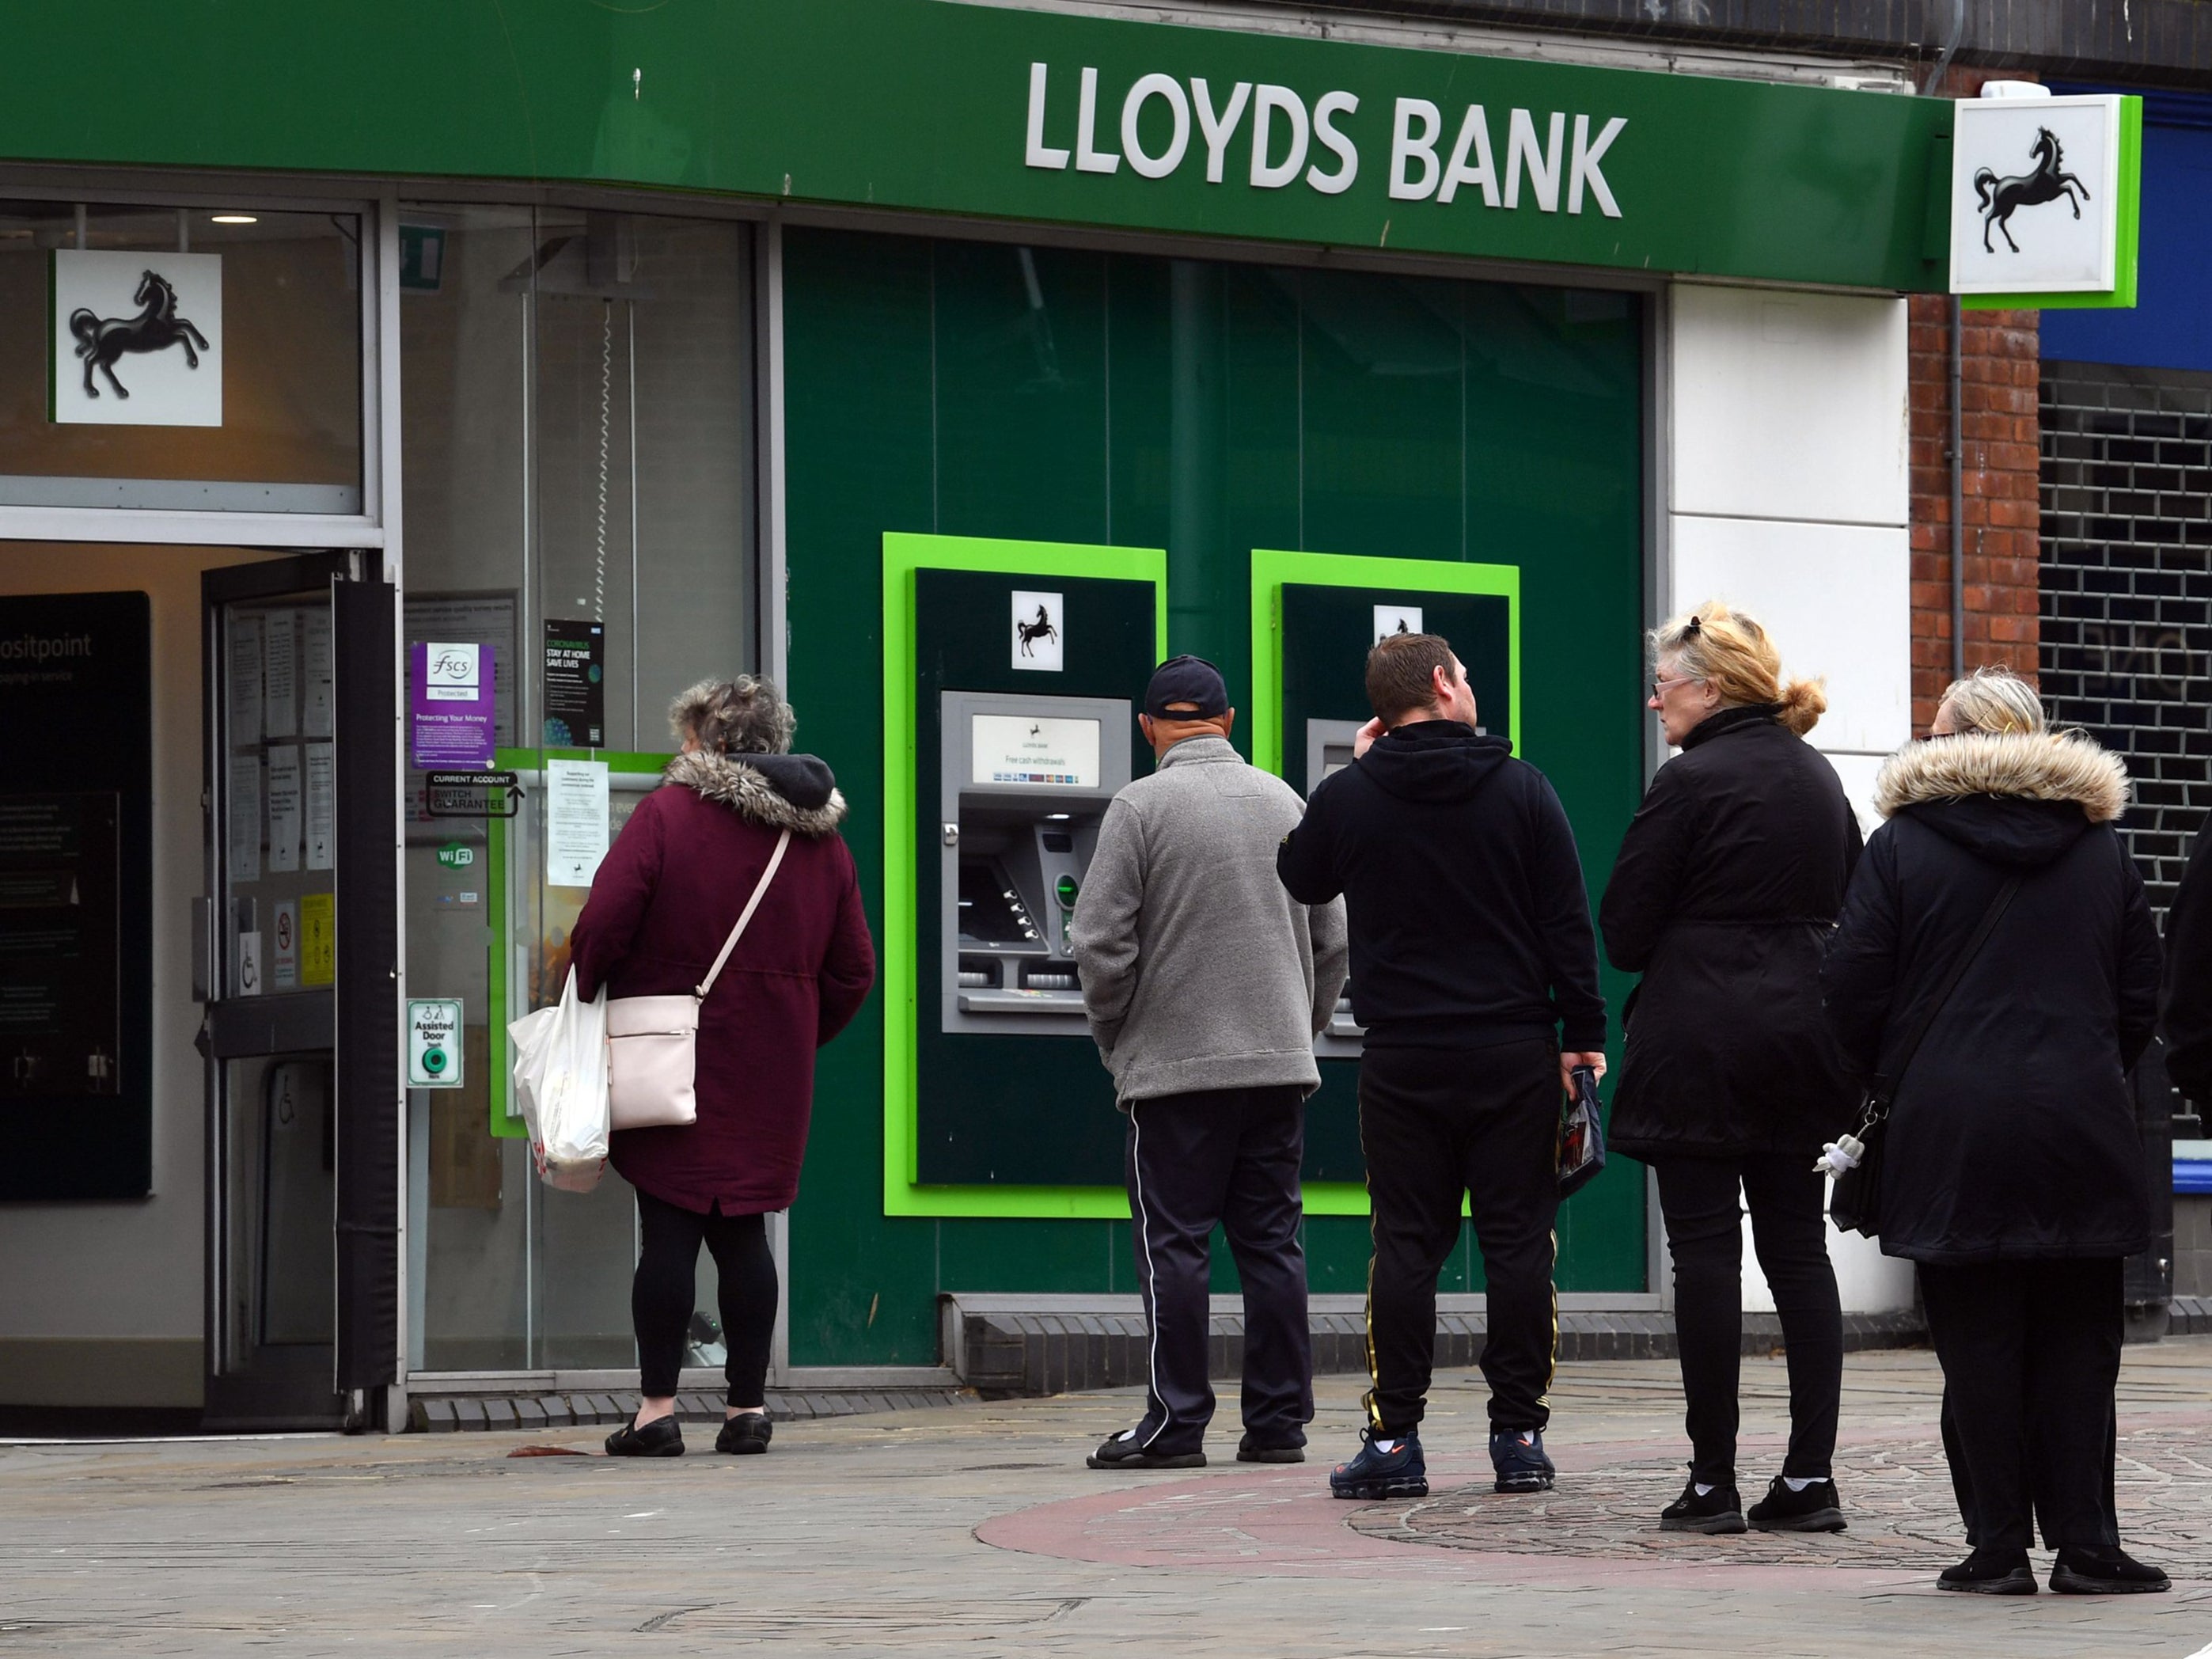 The bank is restructuring itself ‘to adapt to changing customer needs’